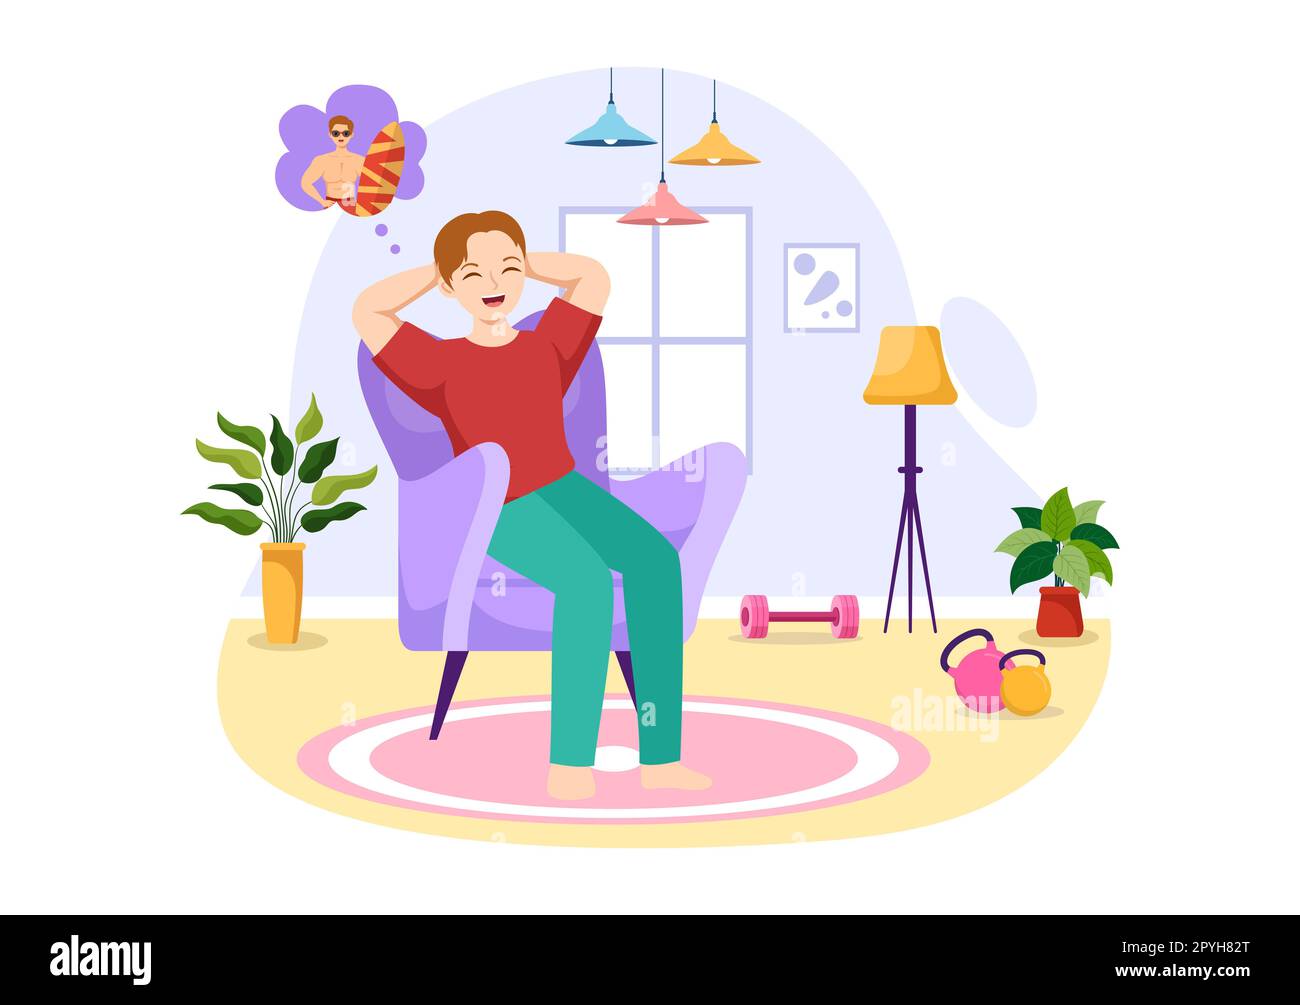 People Daydreaming Illustration with Imagining and Fantasizing in Bubble for Landing Page or Poster Templates in Flat Cartoon Hand Drawn Stock Photo